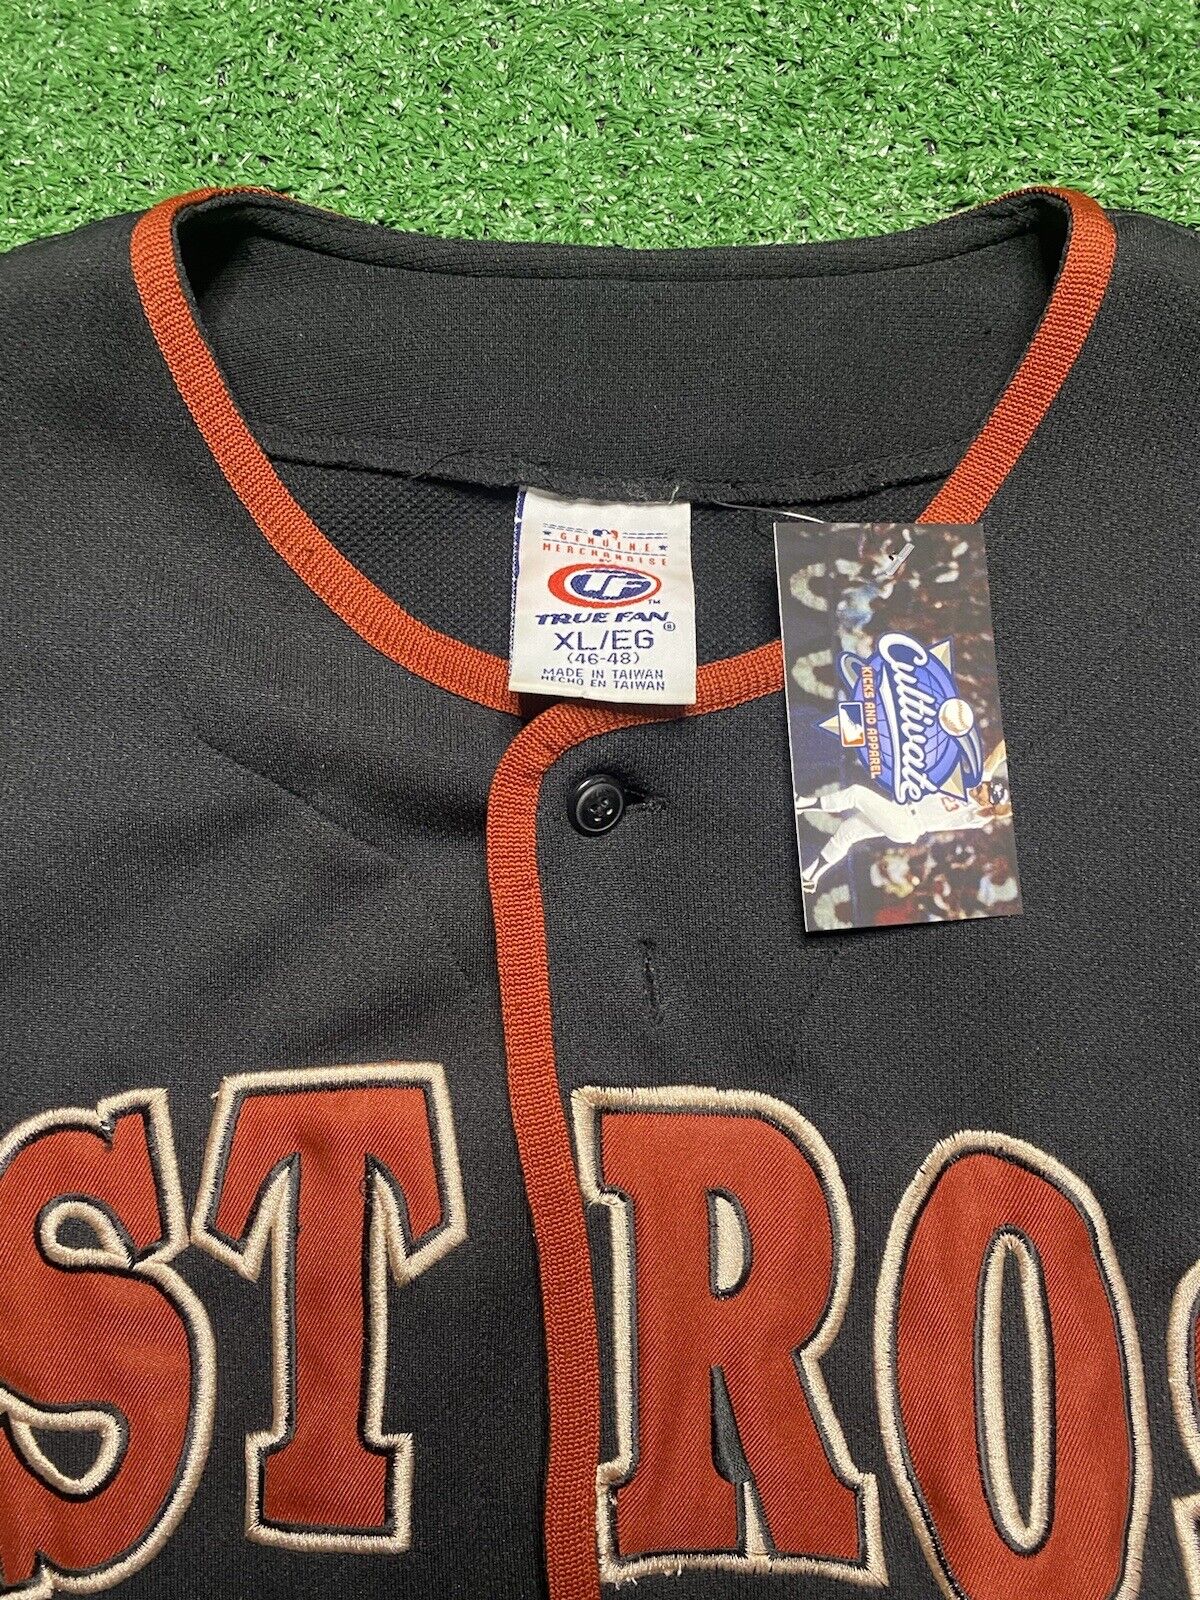 astros black and red jersey